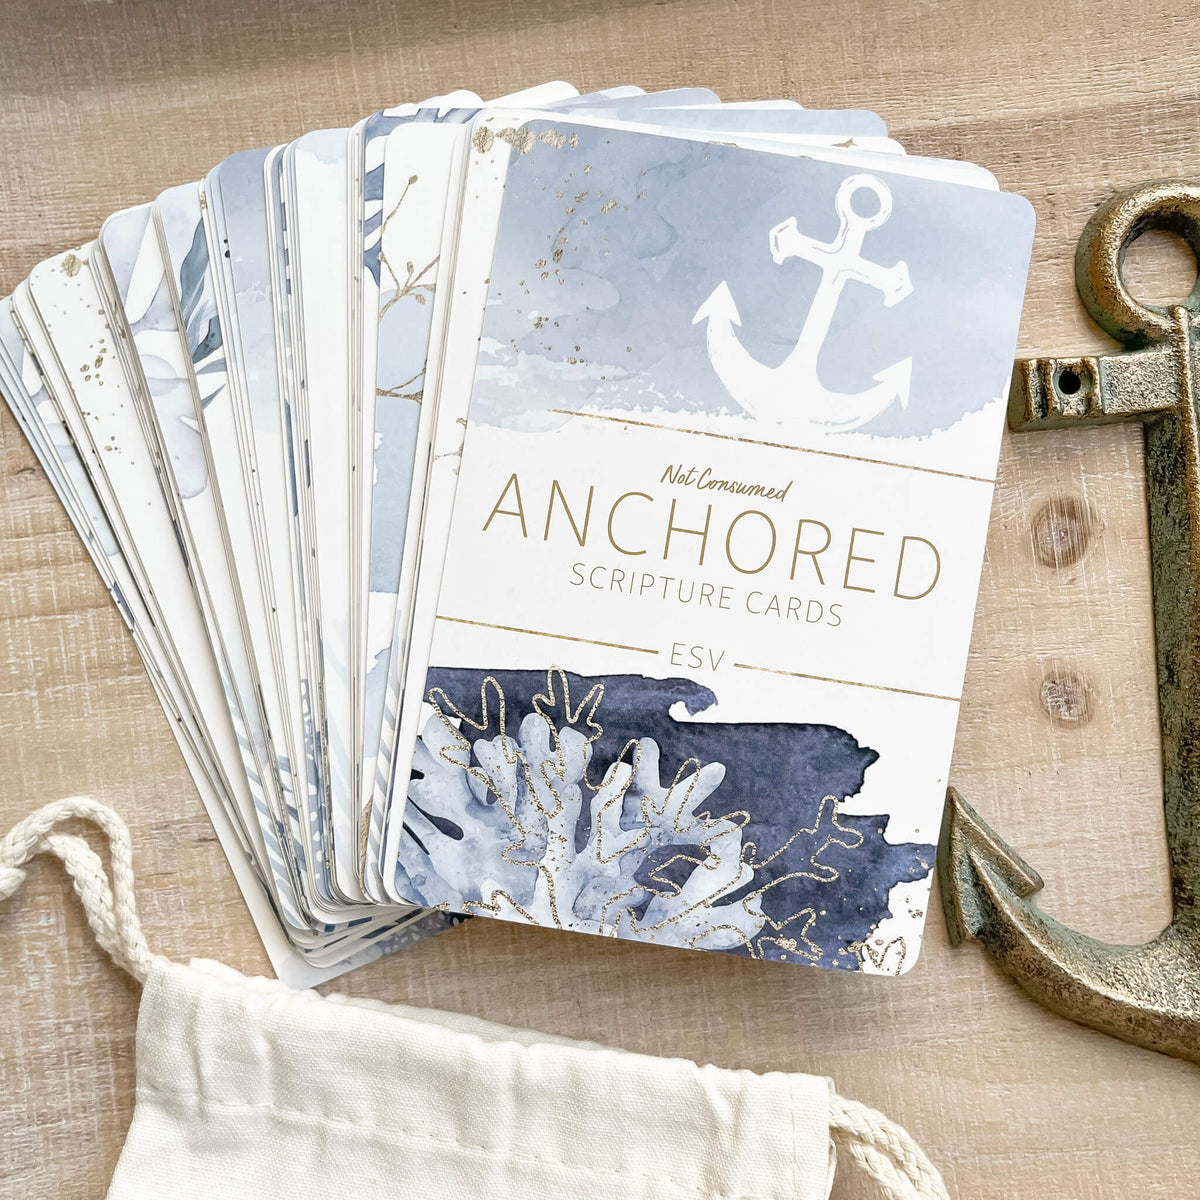 Anchored scripture cards ESV cover